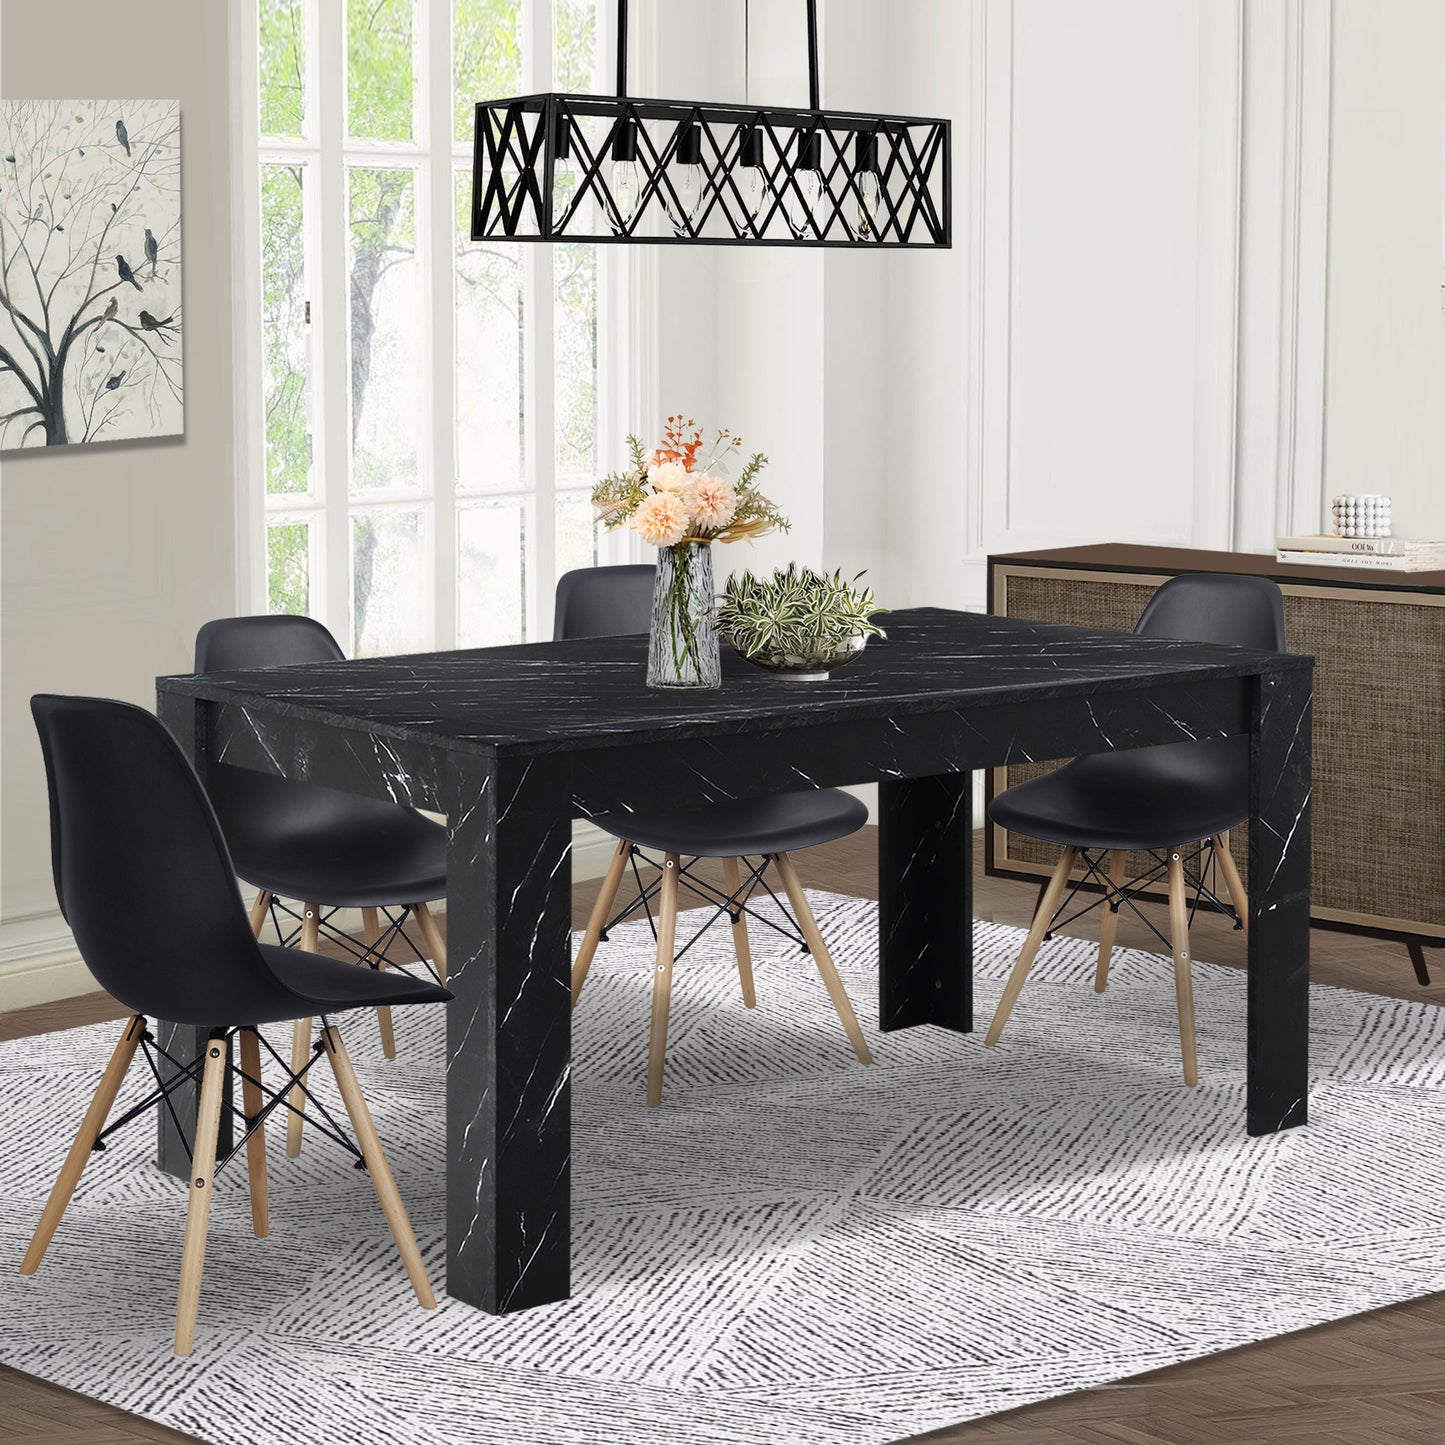 Dining furniture - Black dining table